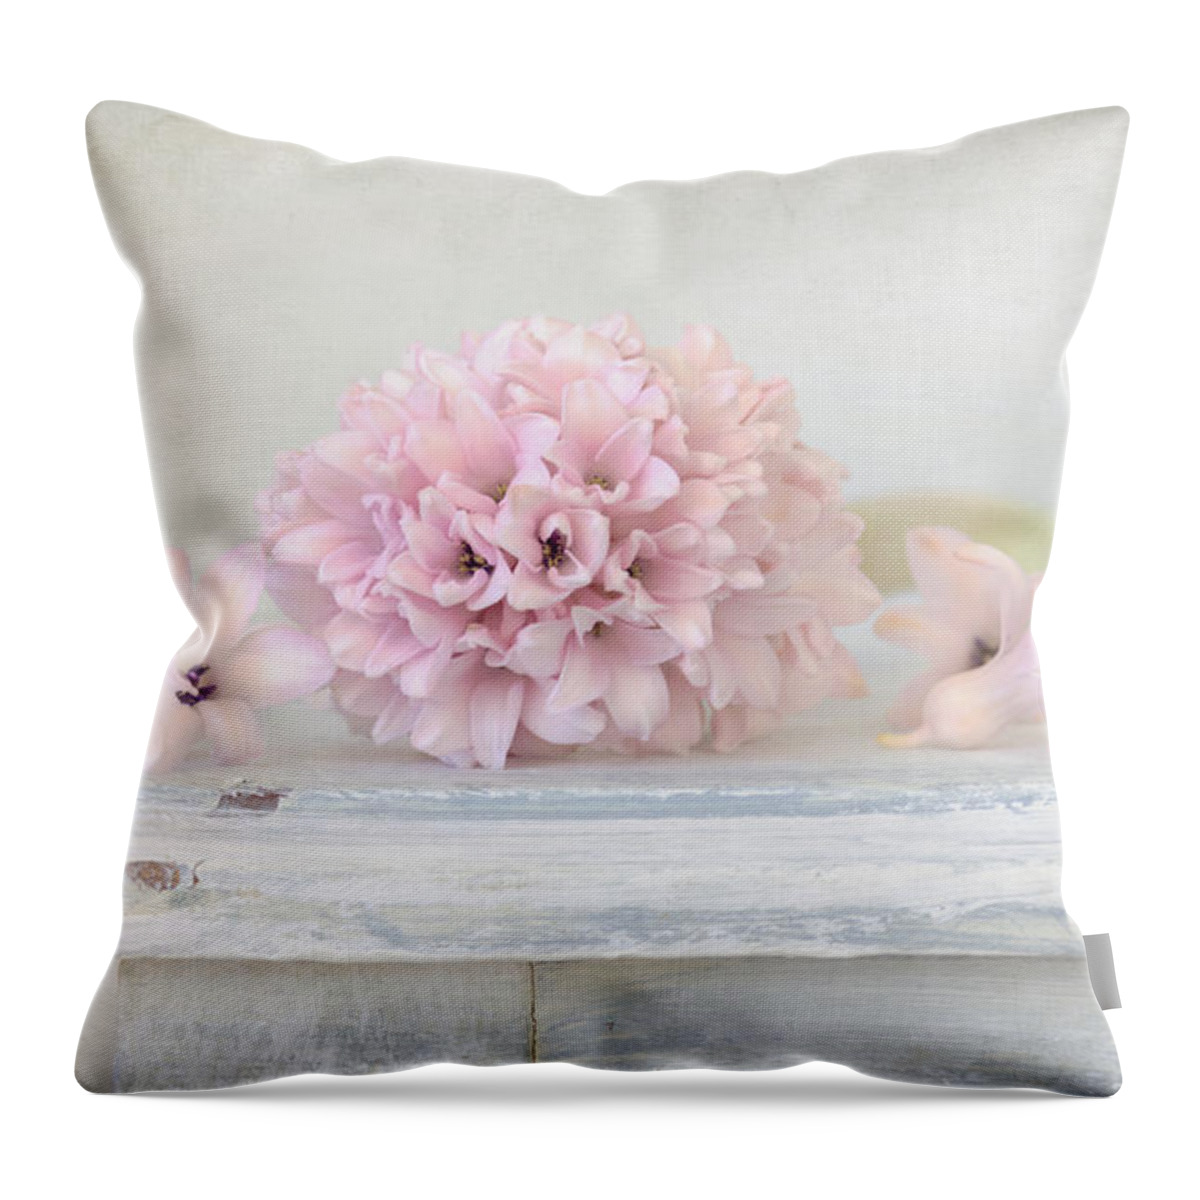 Hyacinth Throw Pillow featuring the photograph Pastel Pink Hyacinth by Kim Hojnacki